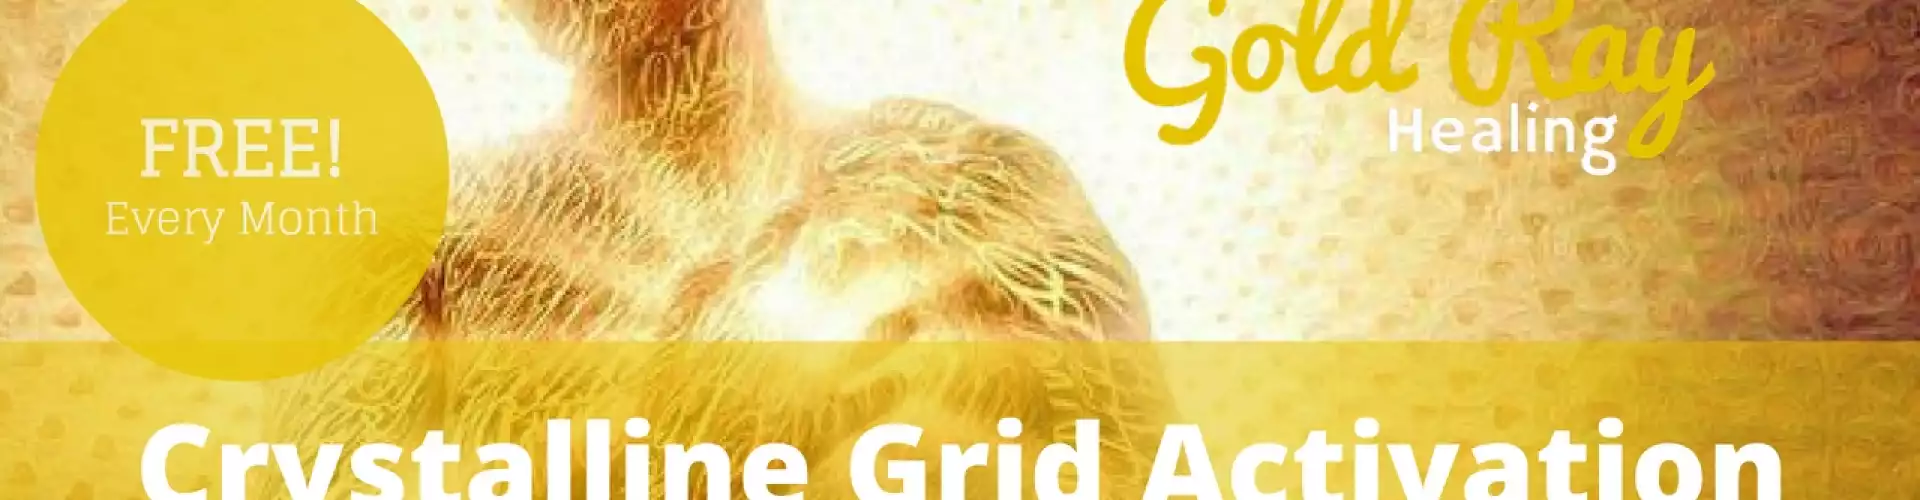 Crystalline Grid Activation With The Golden Ray